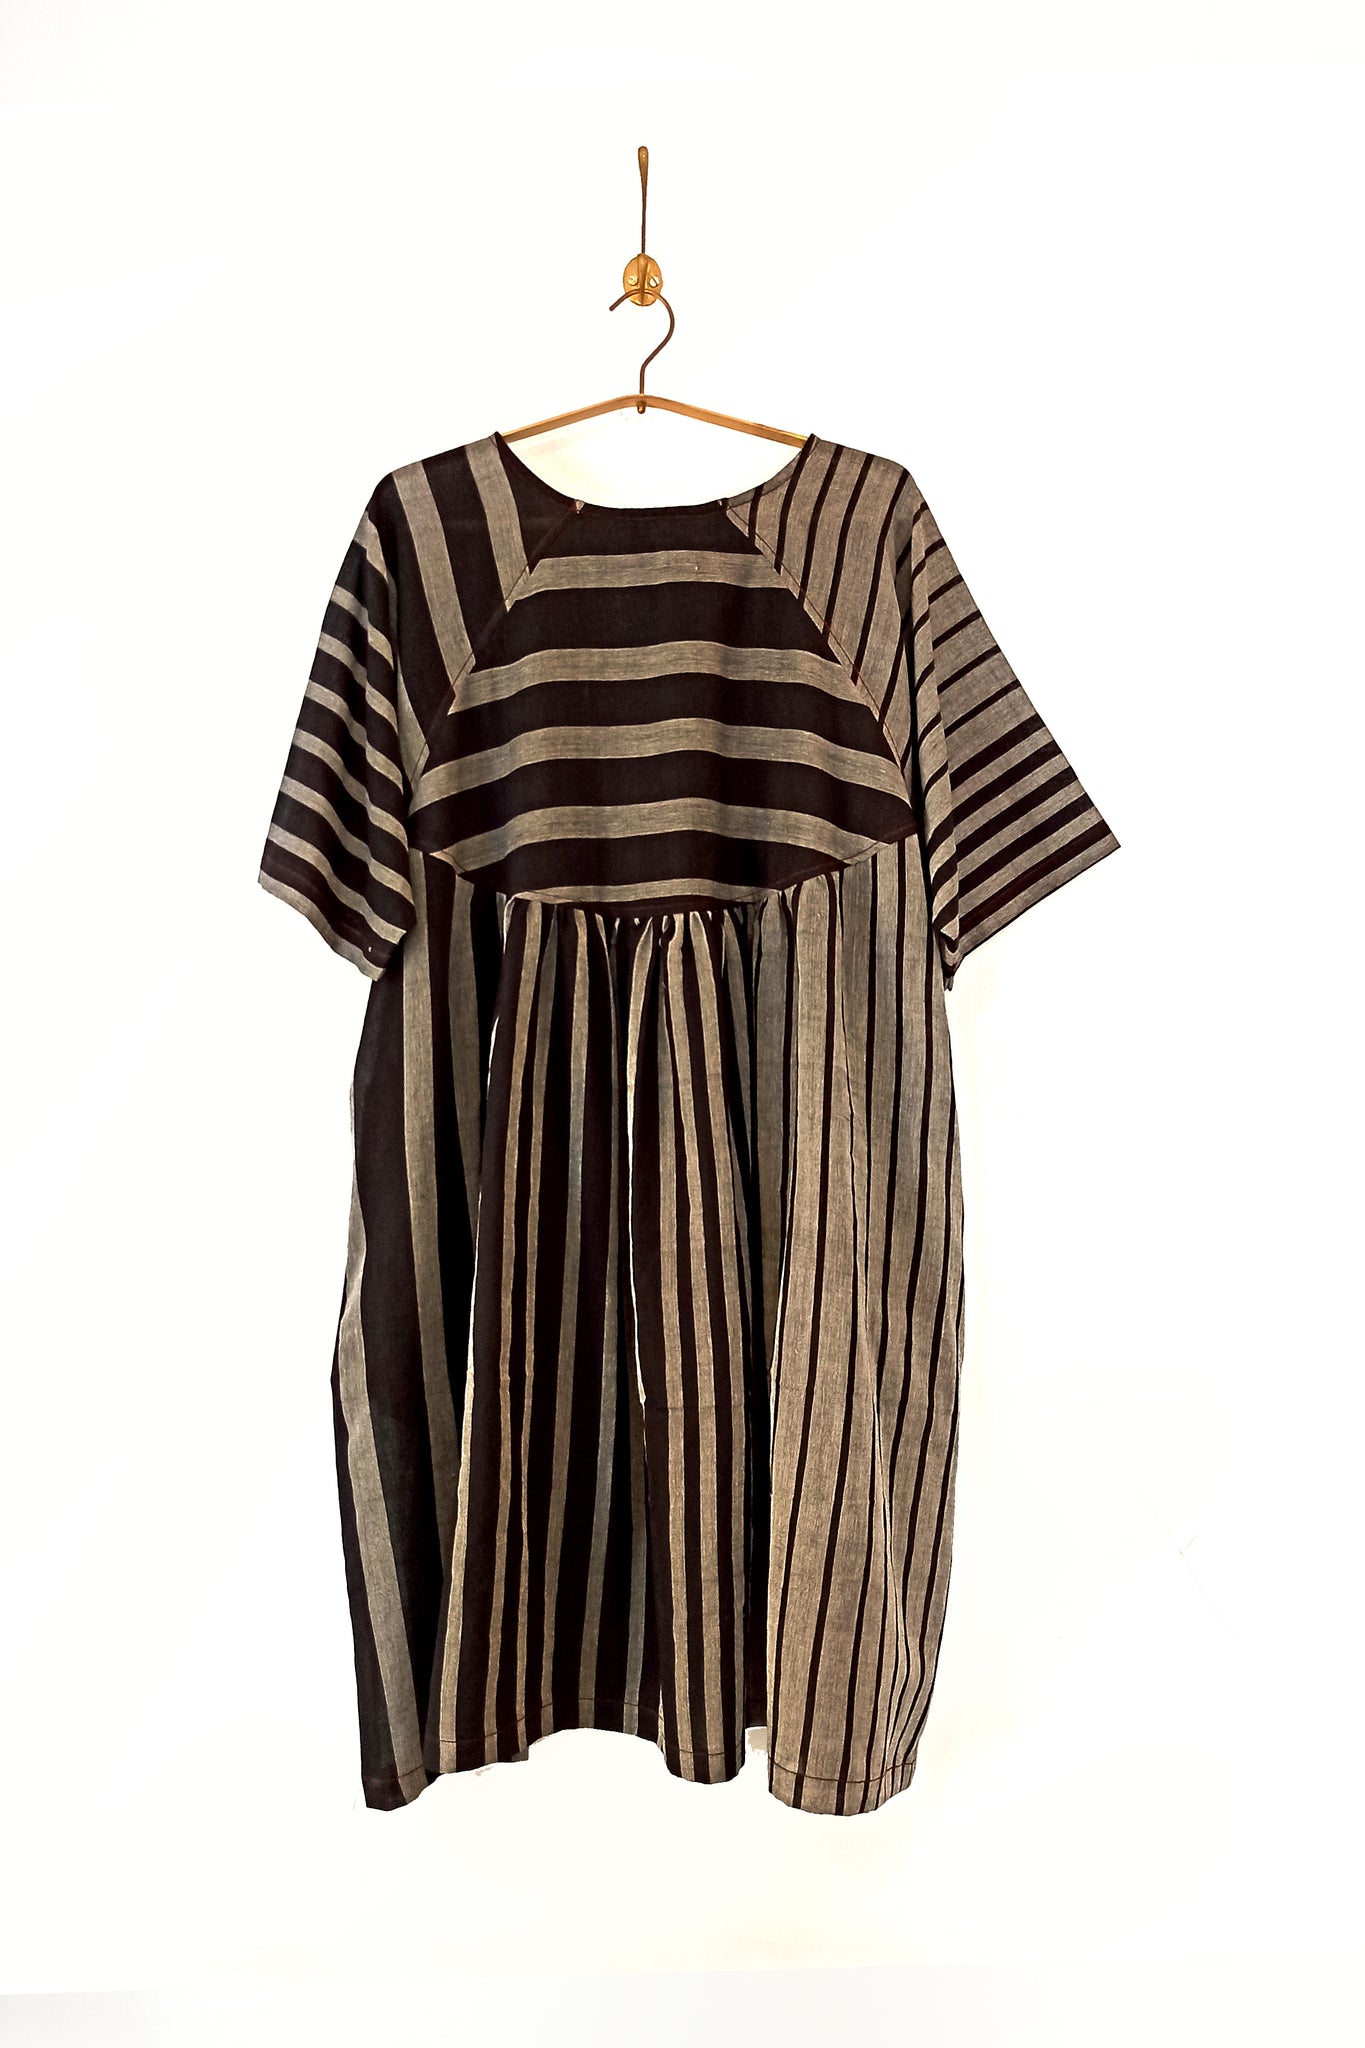 Striped Freedom dress from SS21